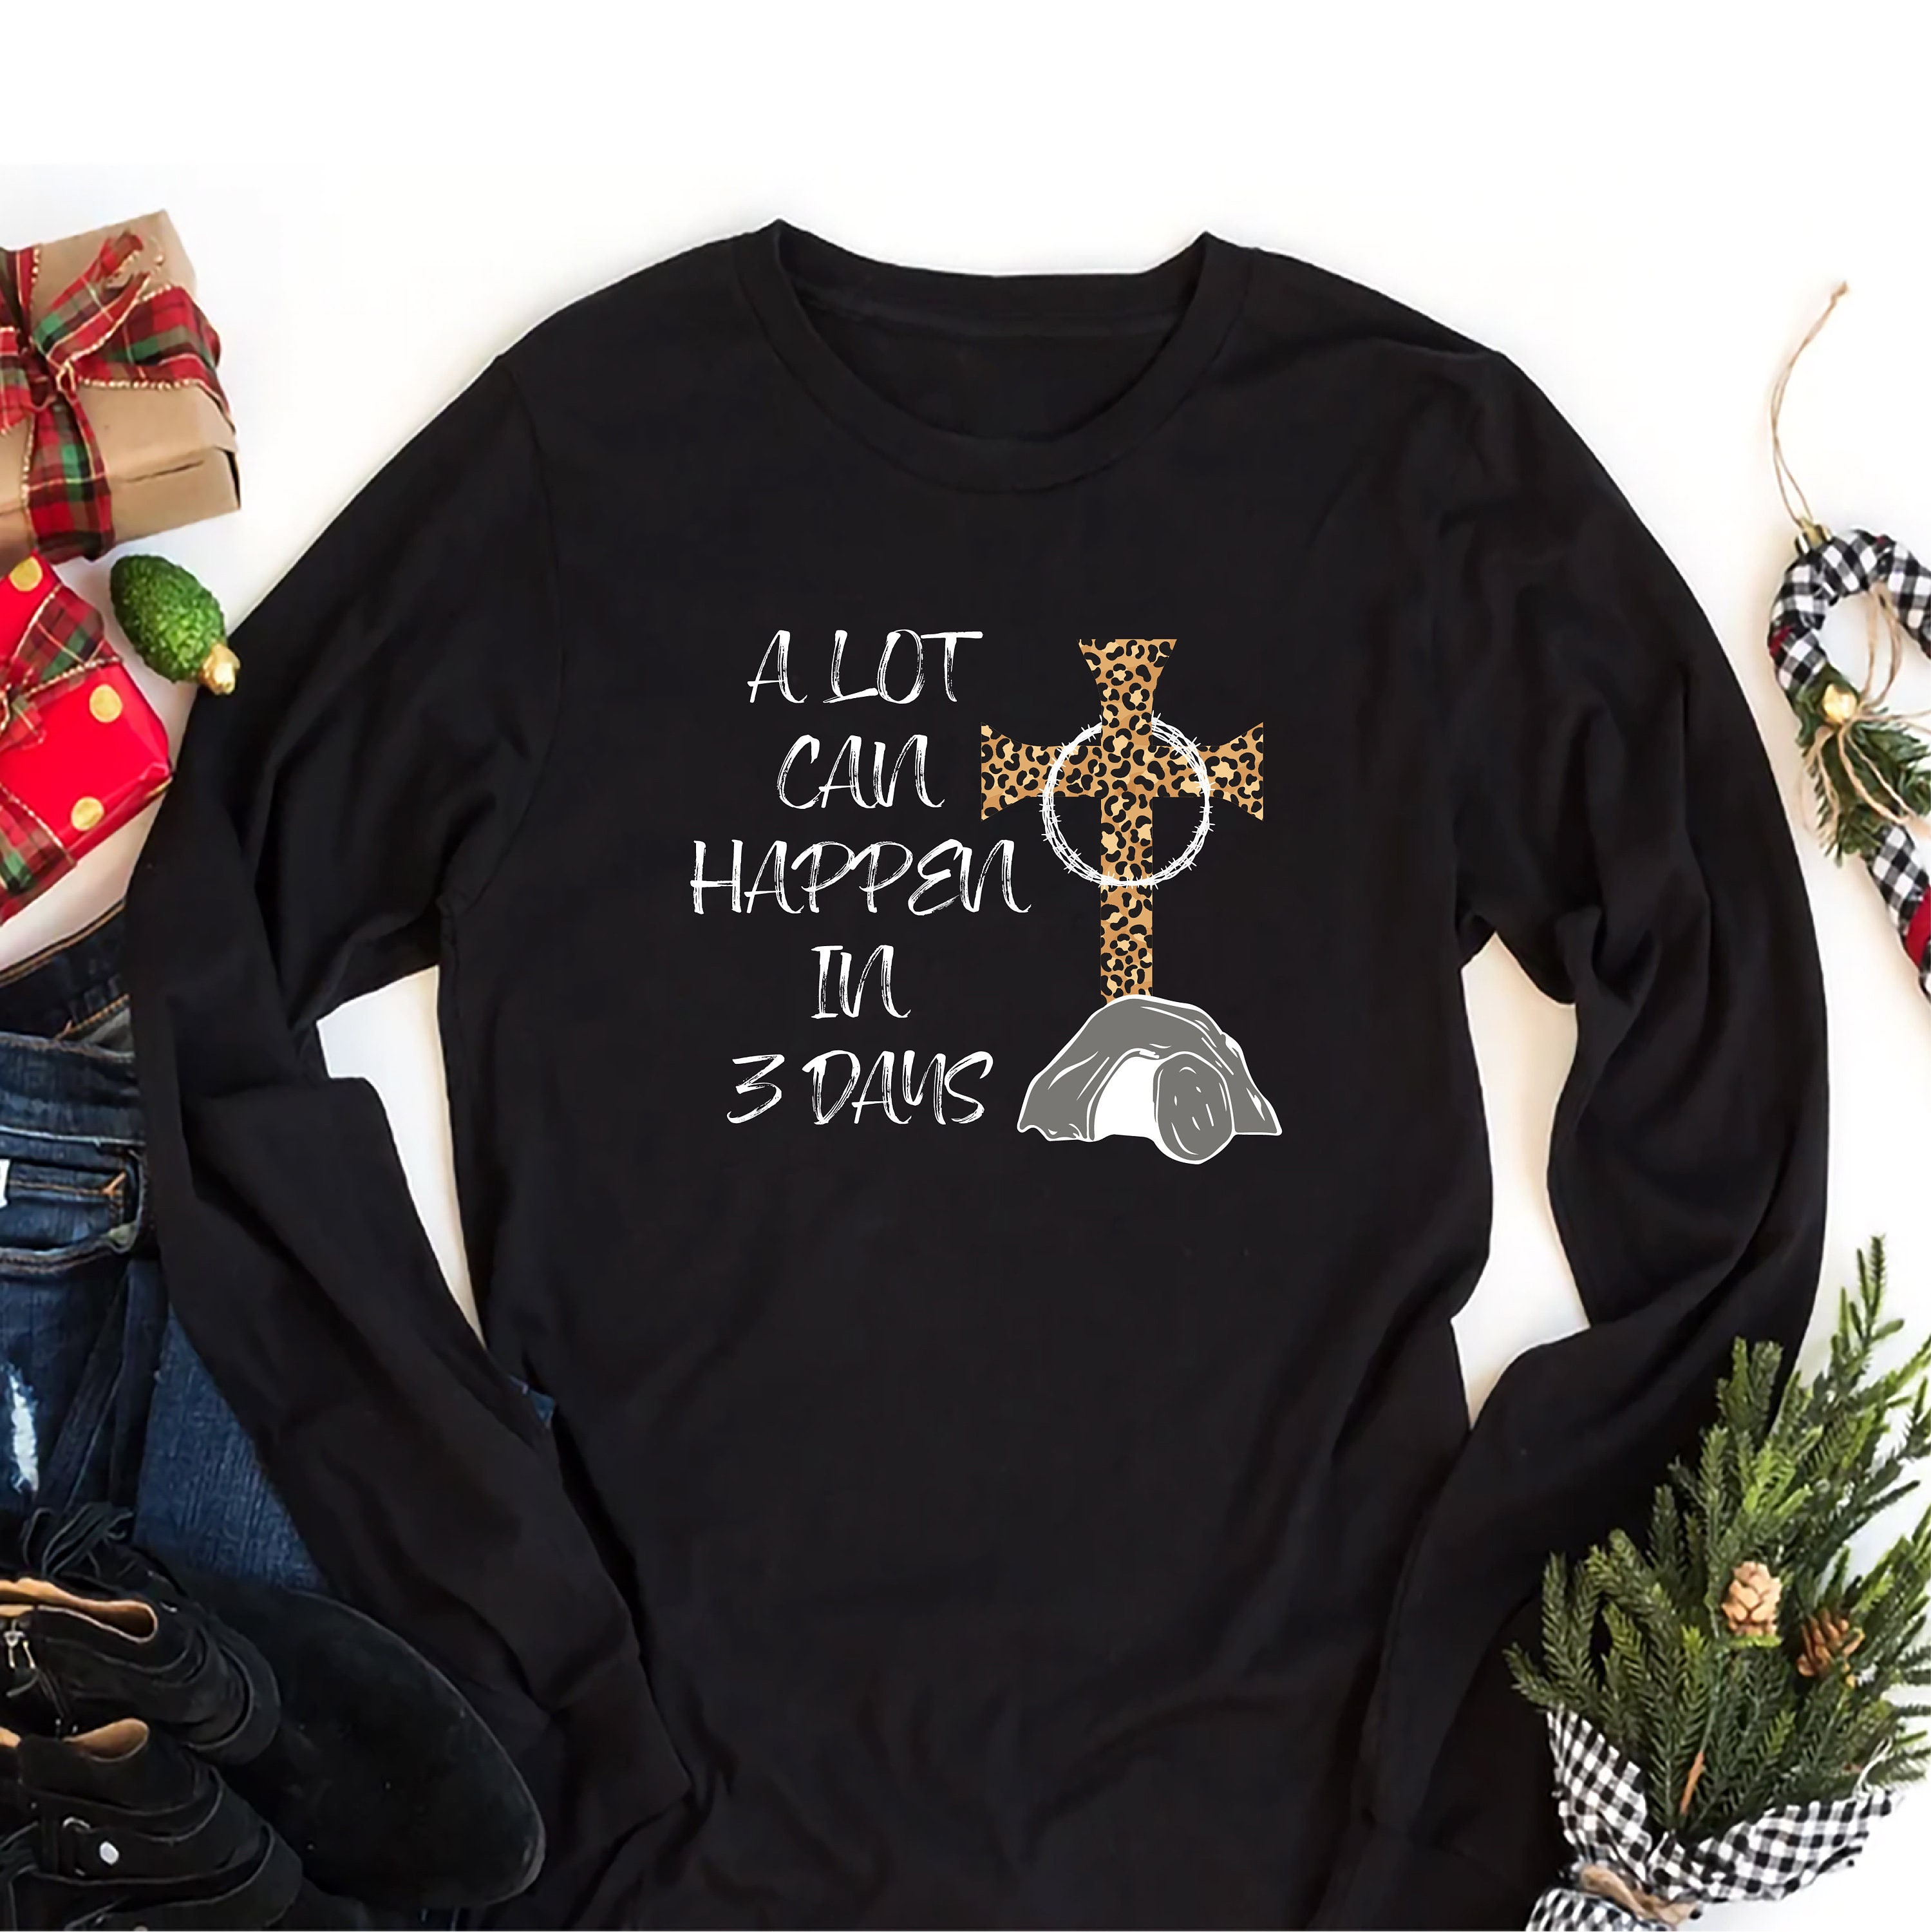 A Lot Can Happen in 3 Days Long Sleeve T-shirt, Christian Easter Unisex  Long Sleeve Shirt, Easter is for Jesus Shirt, Easter Tee Shirt 